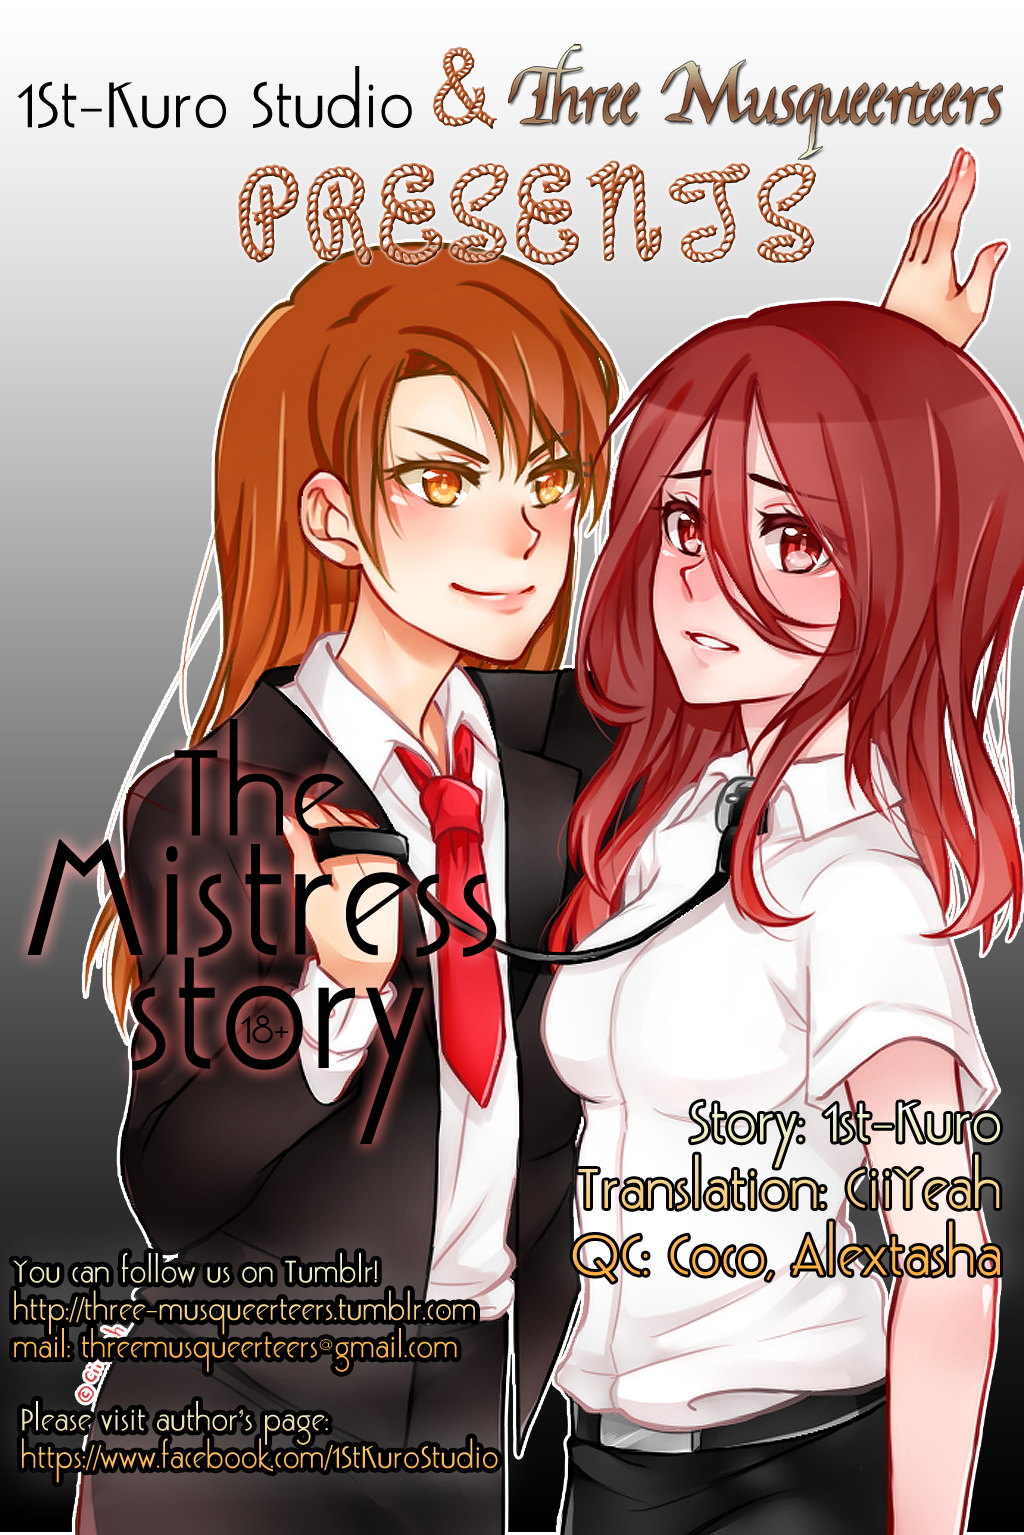 Yes! We will be working at The Mistress Story along with 1st-Kuro Studio. They are